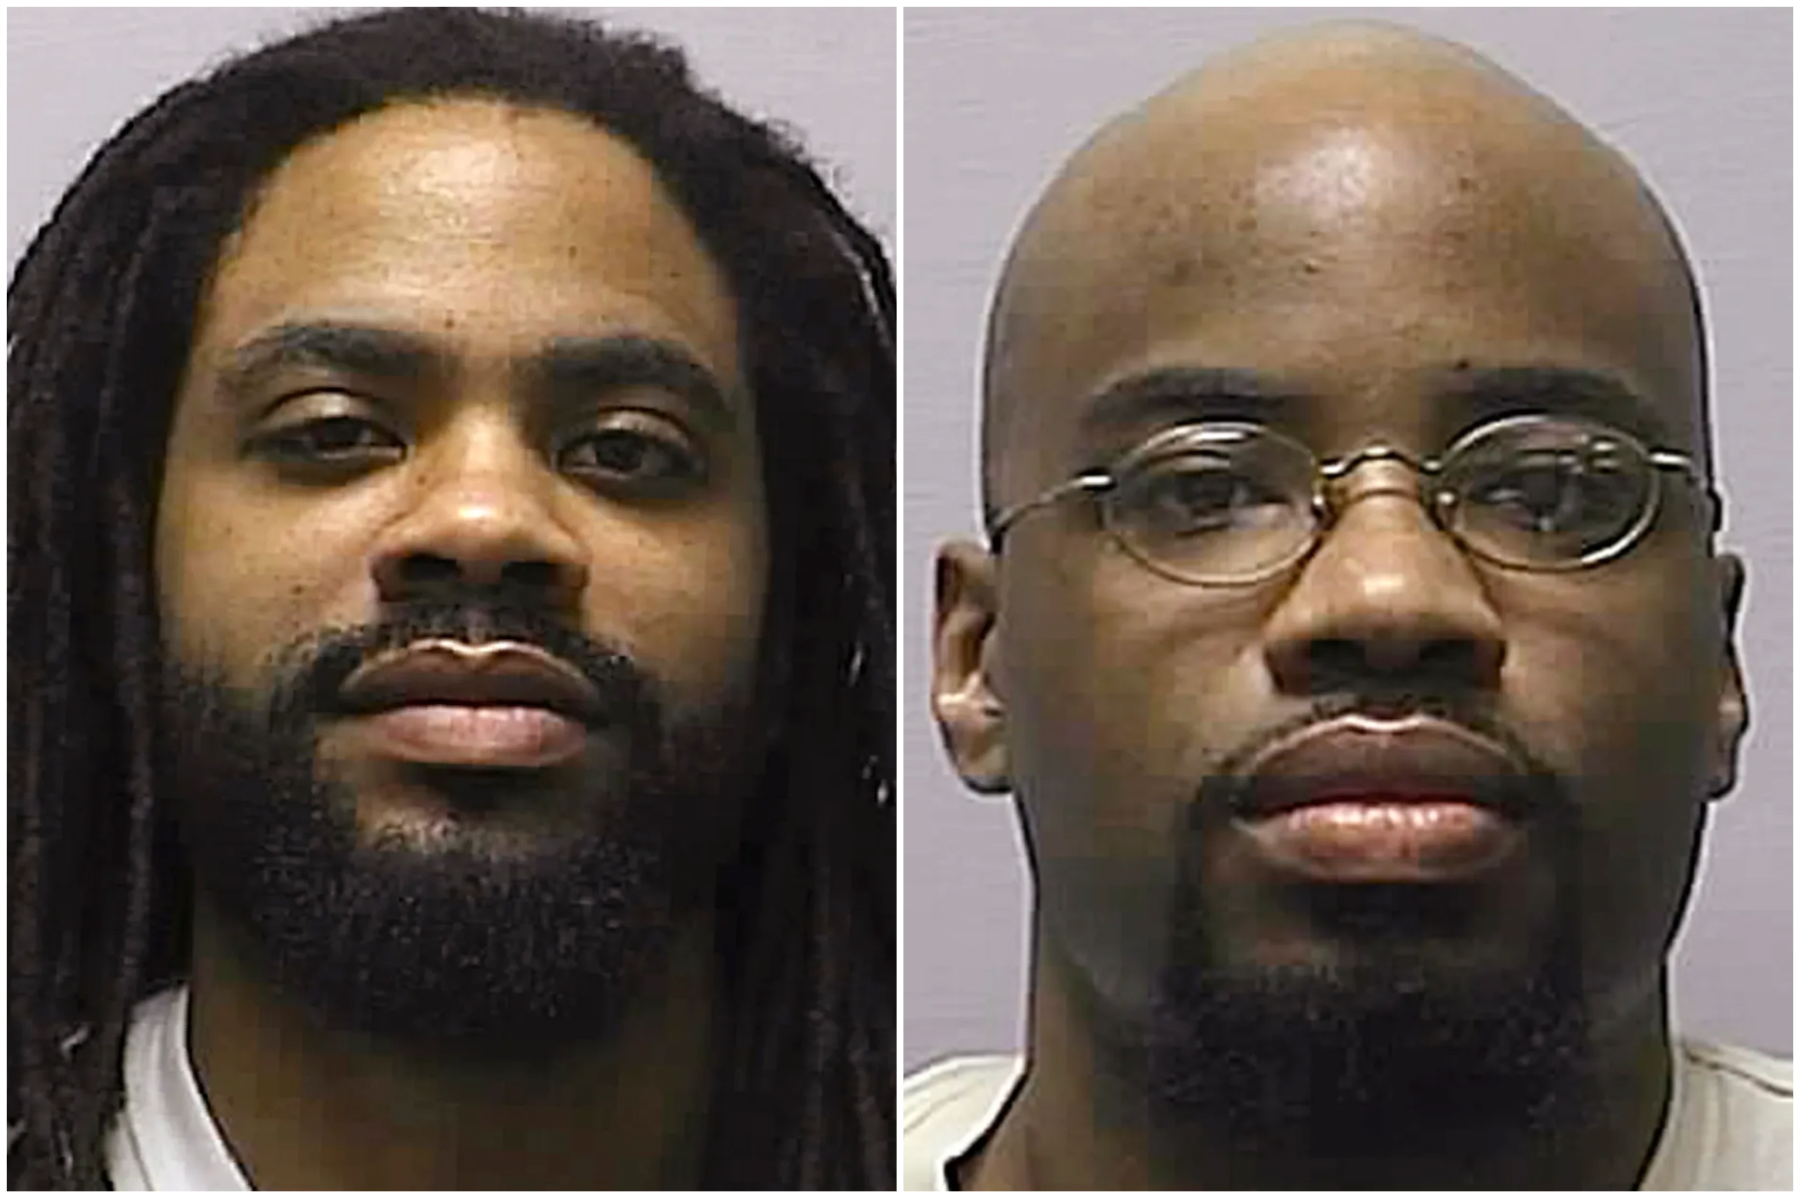 Brothers Reginald Carr (left) and Jonathan Carr (right) were convicted in the December 2000 ‘Wichita massacre’